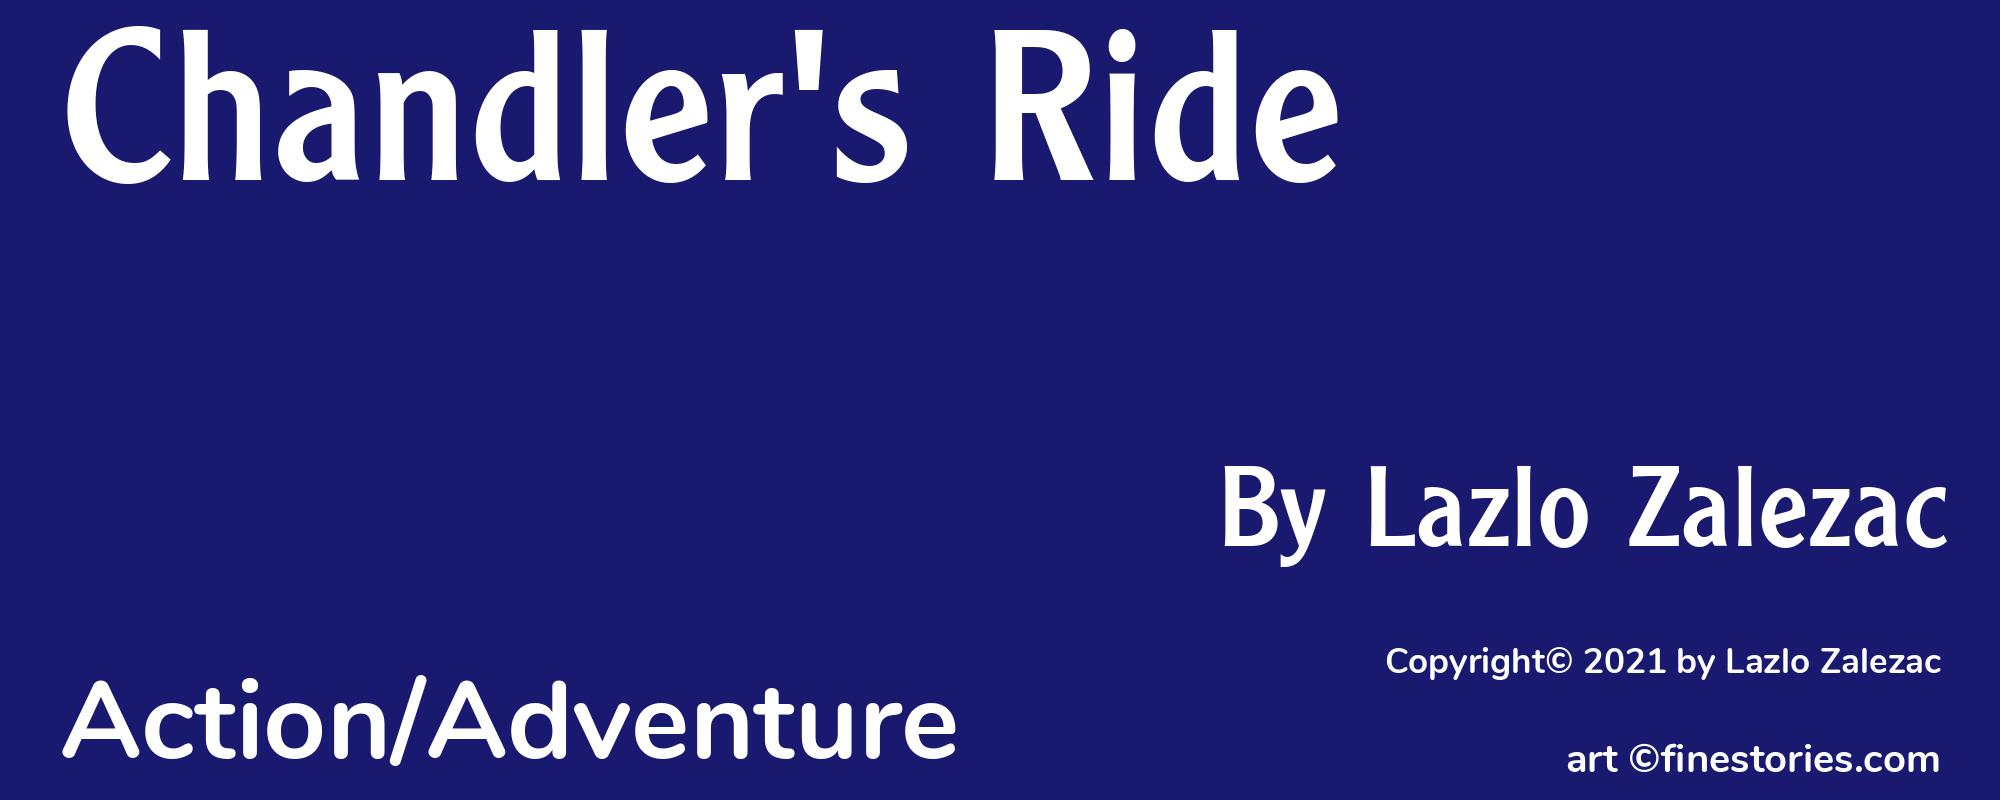 Chandler's Ride - Cover